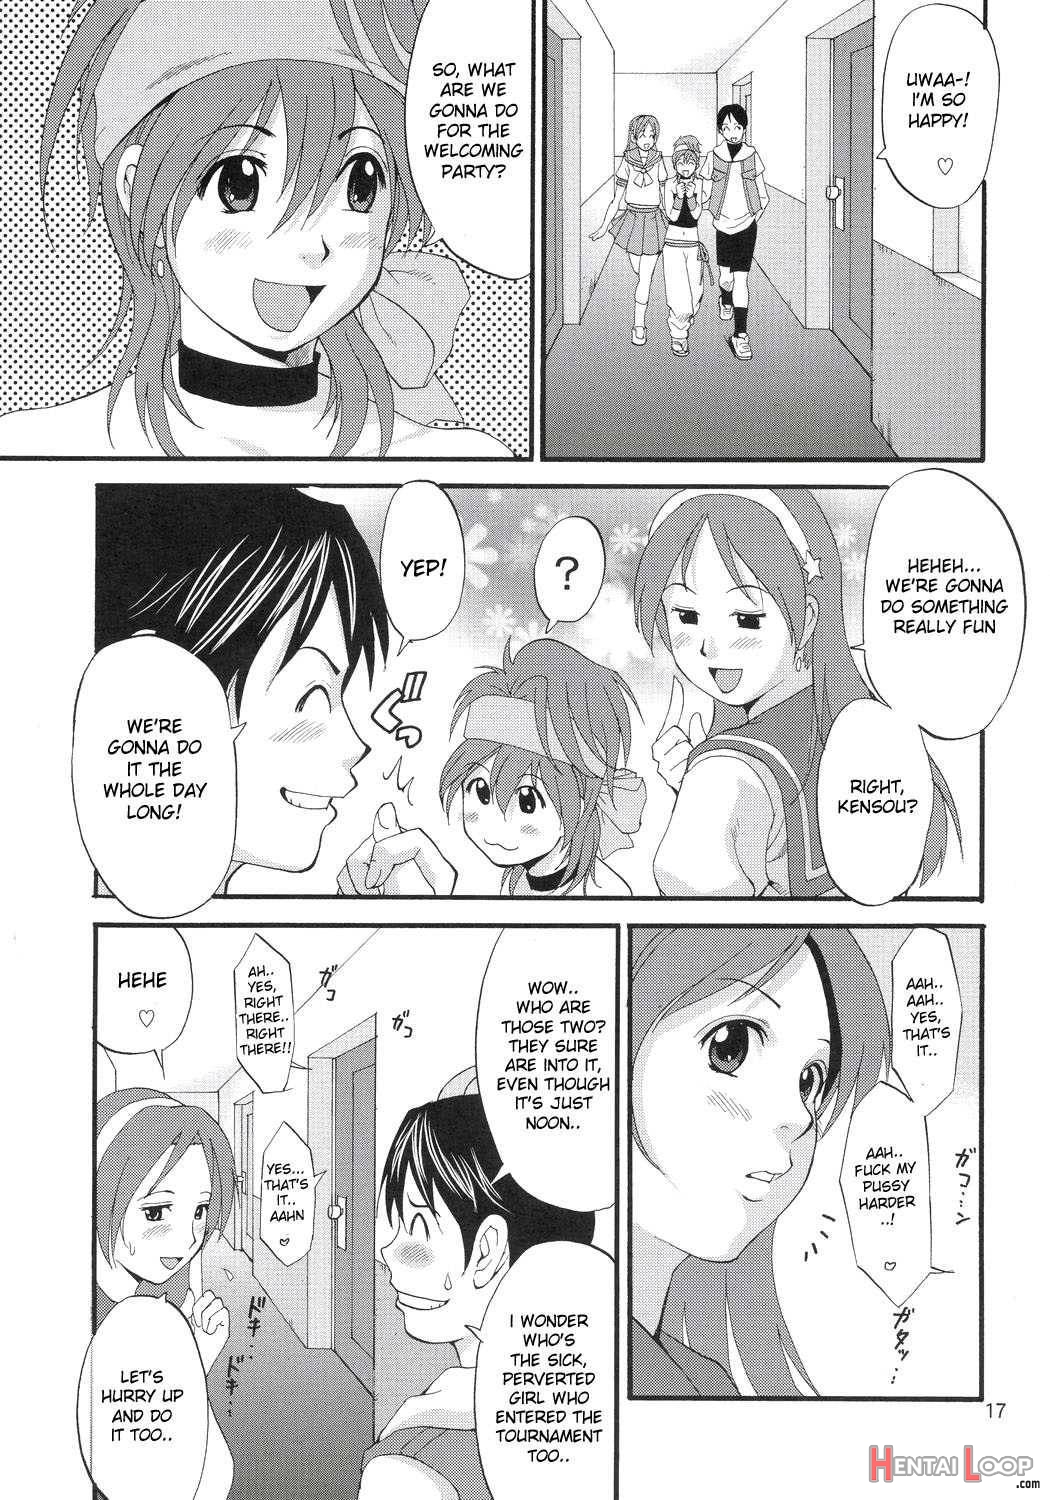 The Yuri&Friends Jenny Special page 16